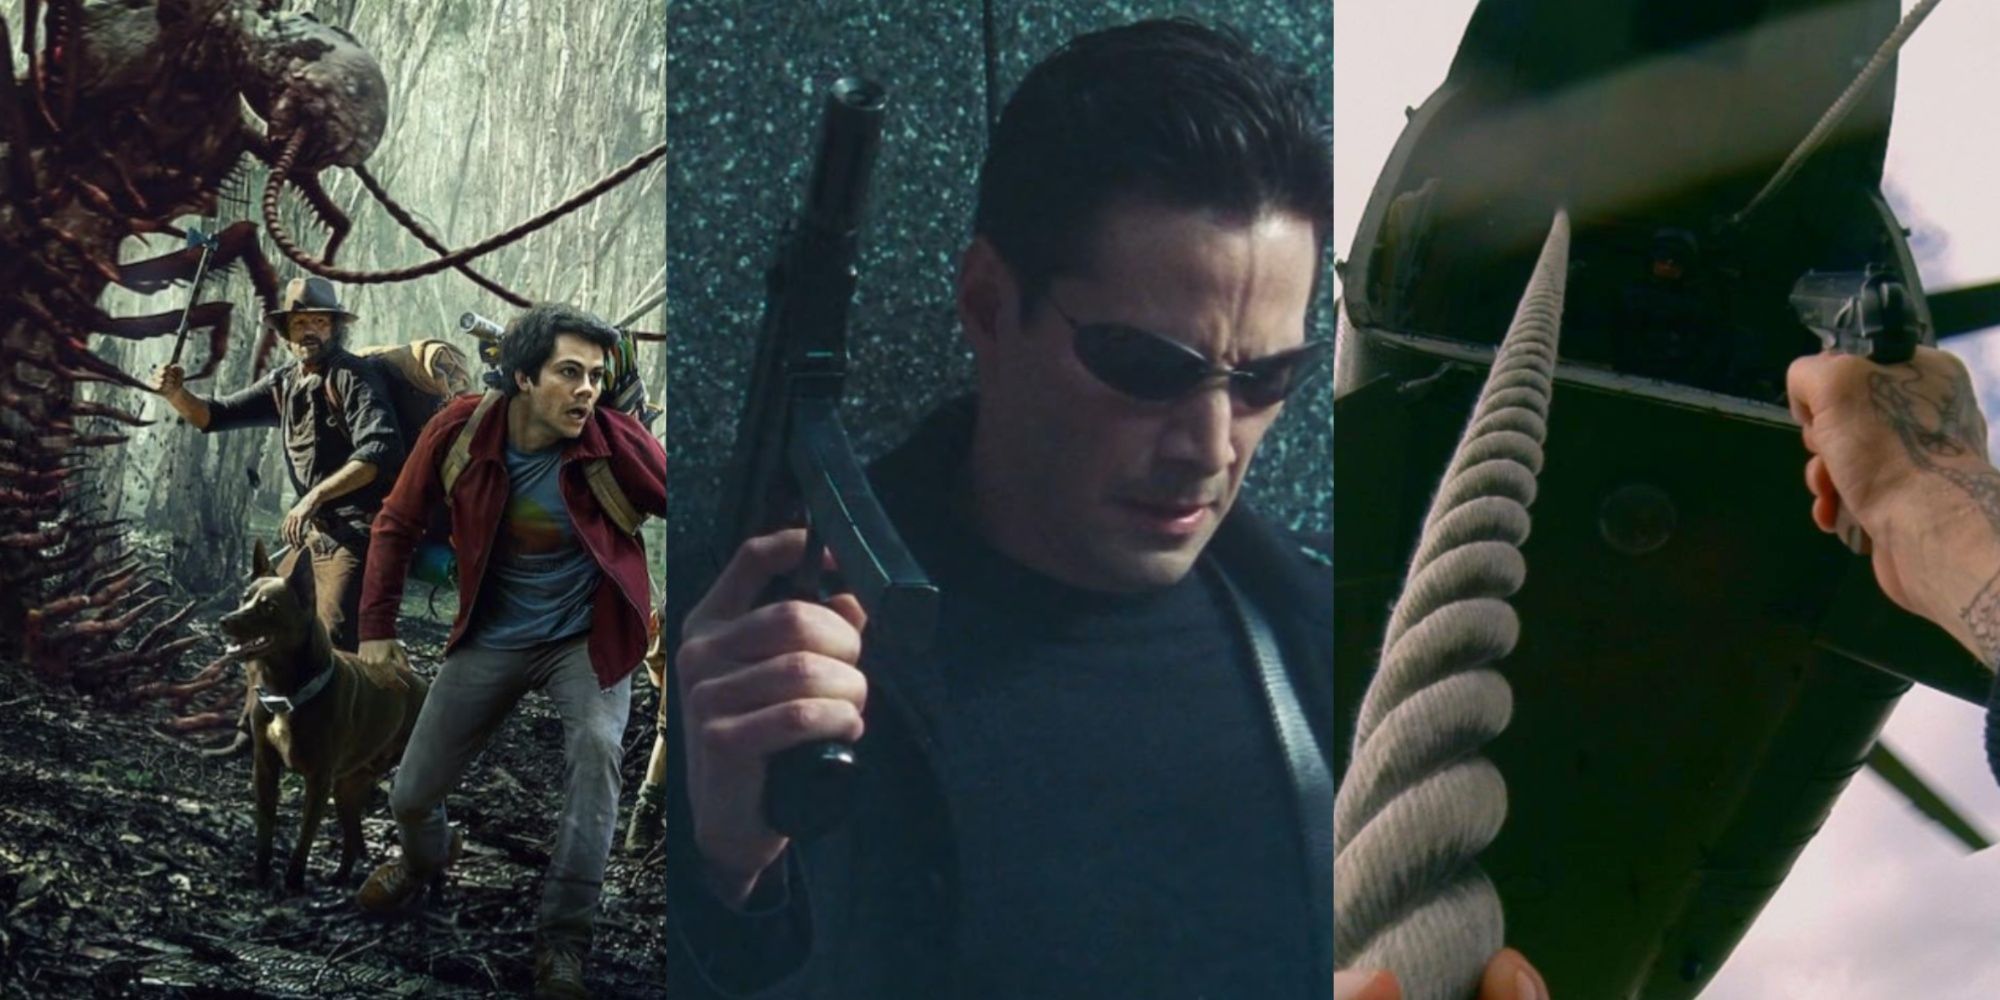 Three-image collage of characters from Love and Monsters fighting a giant centipede, Keanu Reeves as Neo in The Matrix, and the main character climbing and shooting a helicopter in first-person in Hardcore Henry.